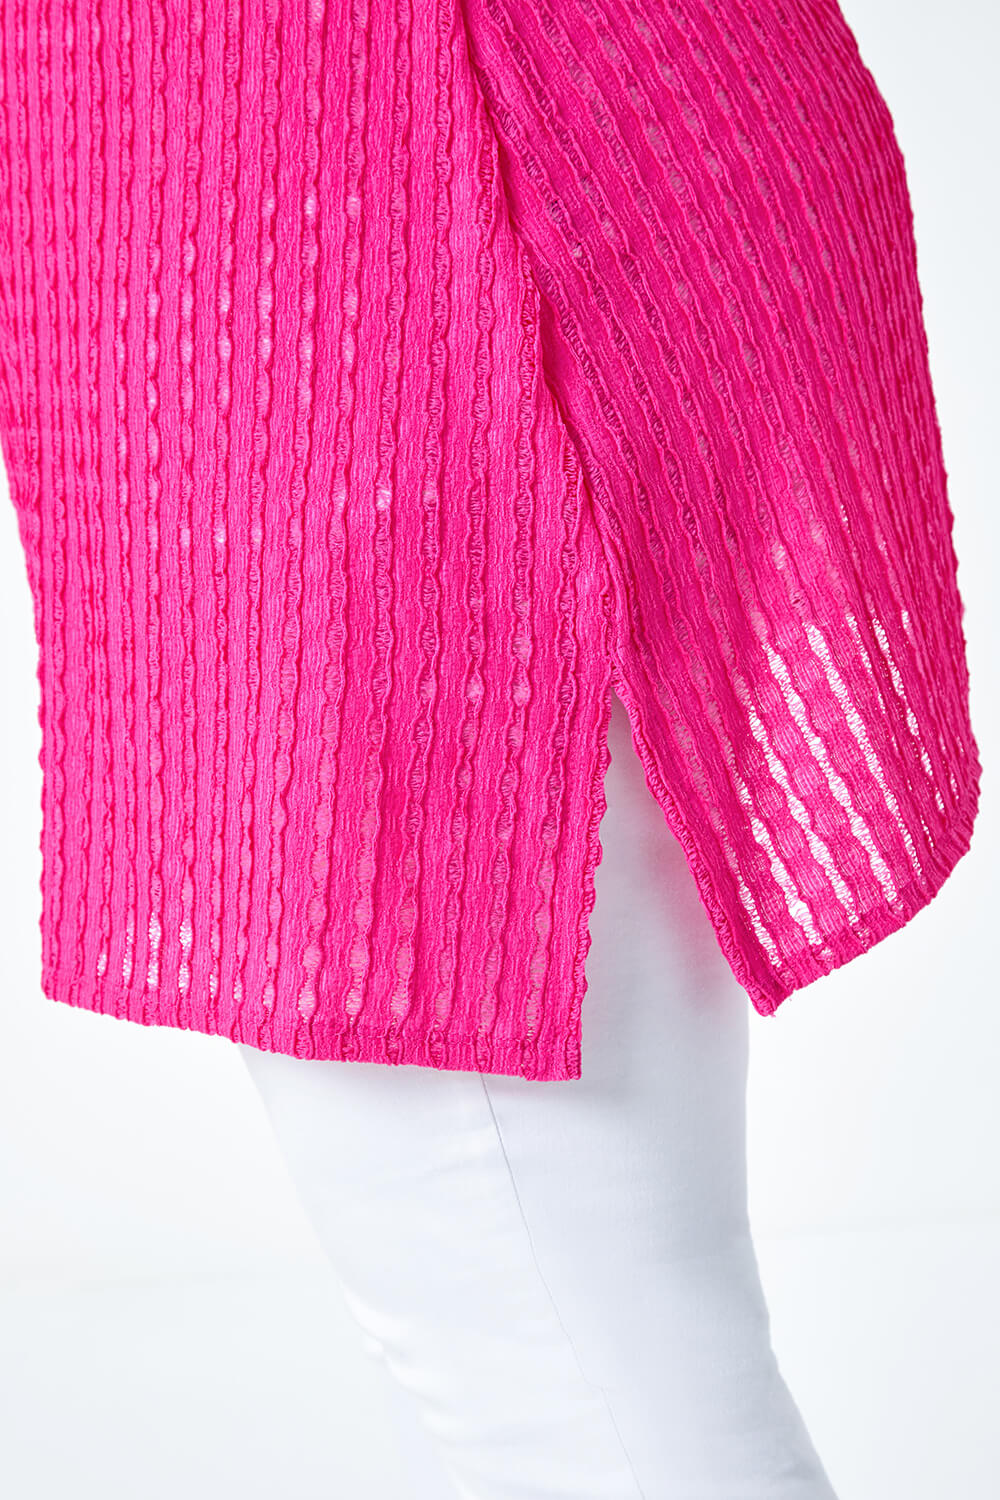 PINK Curve Textured Short Sleeve T-Shirt, Image 5 of 5